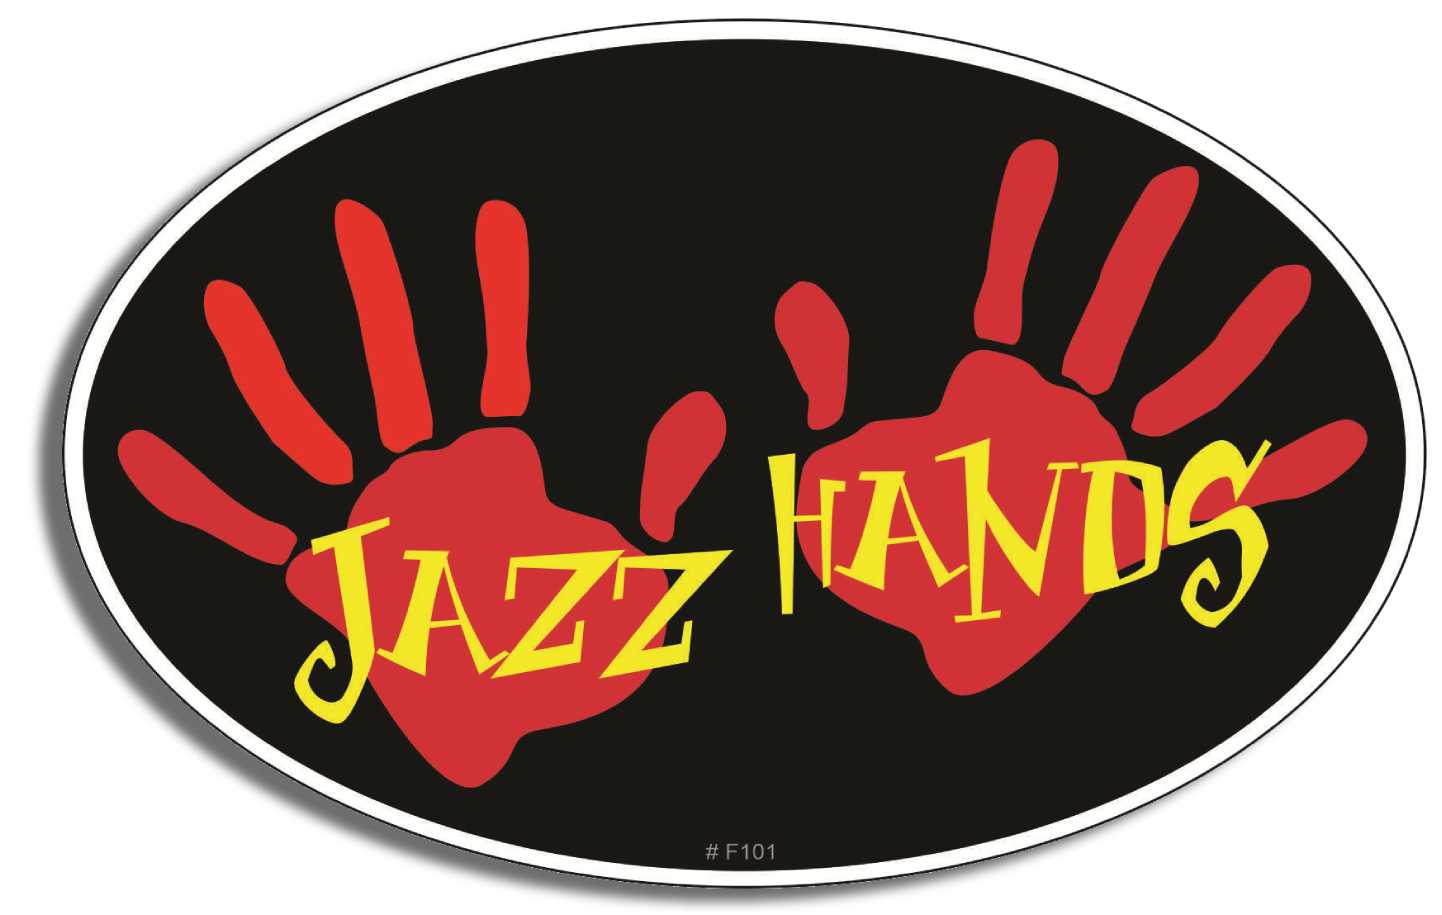 Jazz Hands - 3.5" x 5.5" Bumper Sticker- -  Decal Bumper Sticker-funny Bumper Sticker Car Magnet Jazz Hands-  Decal for cars funny, funny quote, funny saying